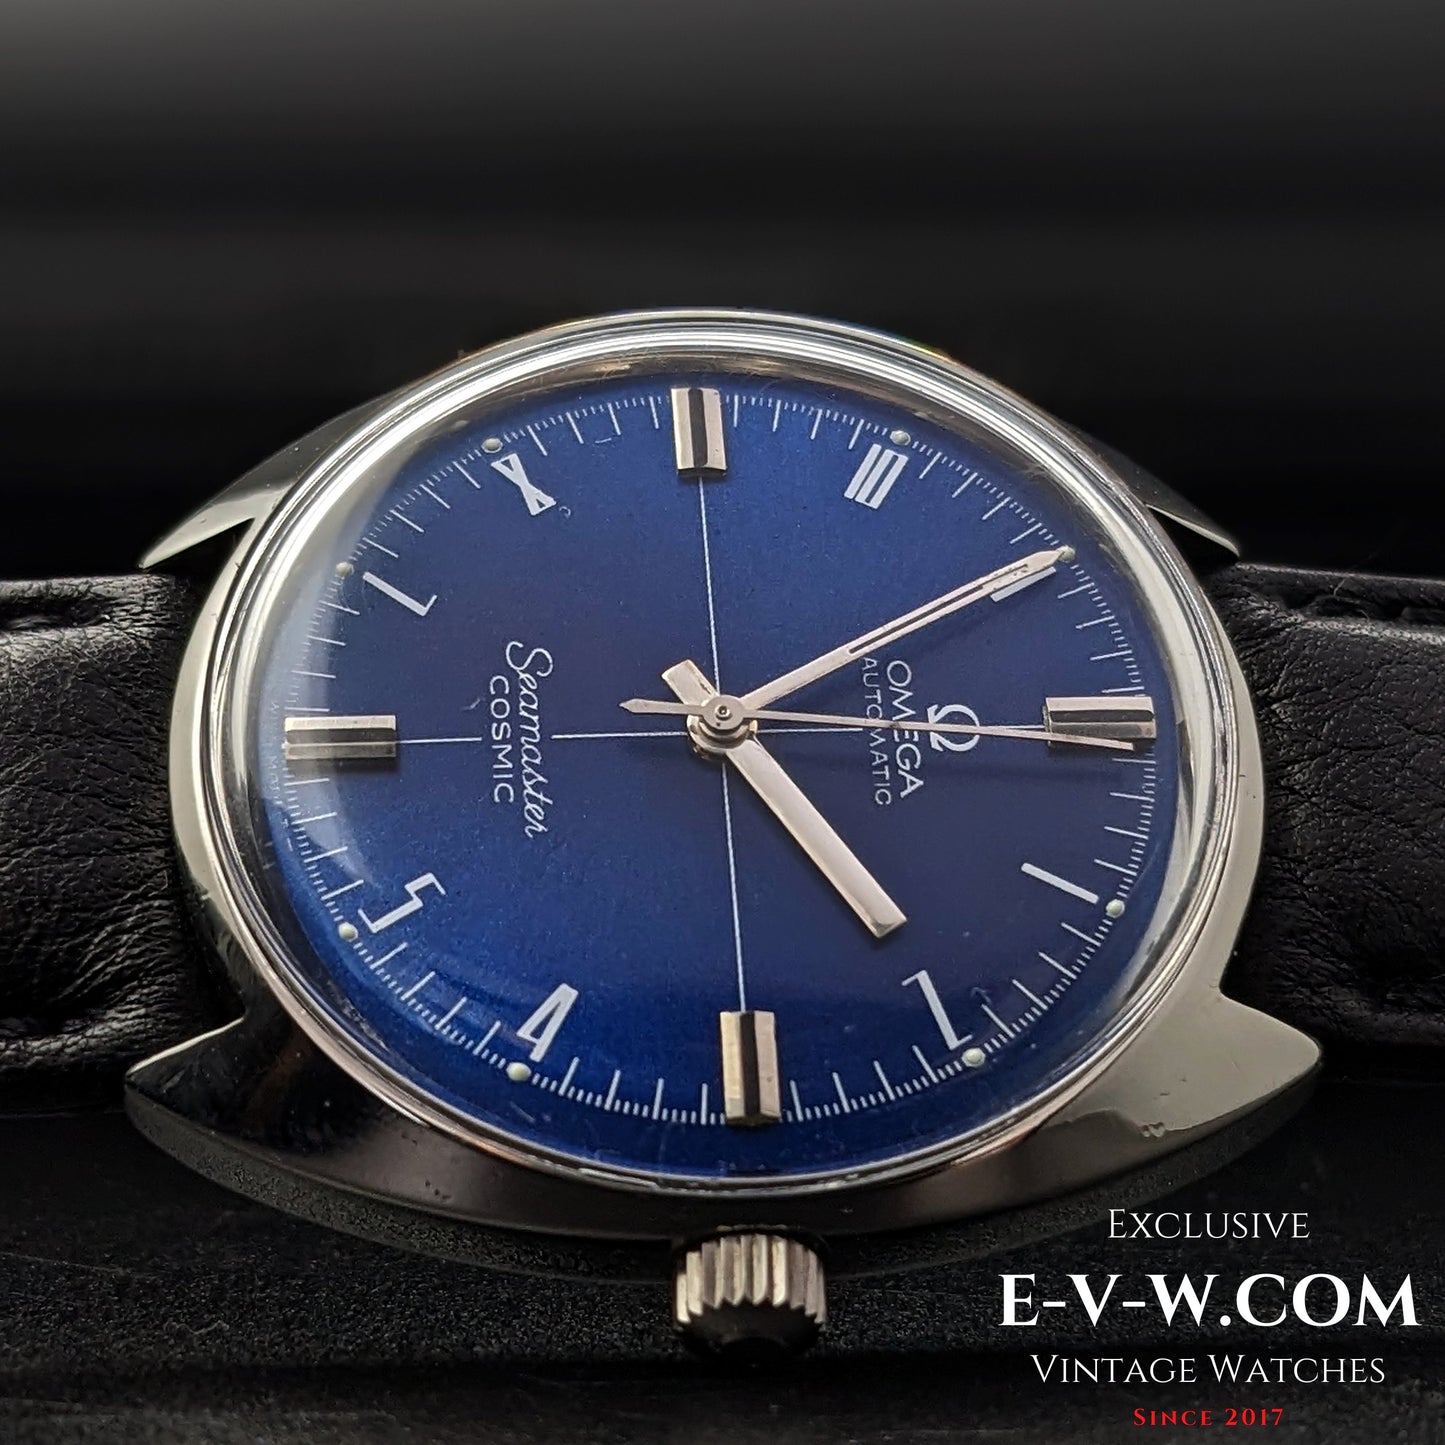 Omega Seamaster Cosmic Automatic Blue Dial / Ref. 165.026 / cal.552 / Vintage 1966